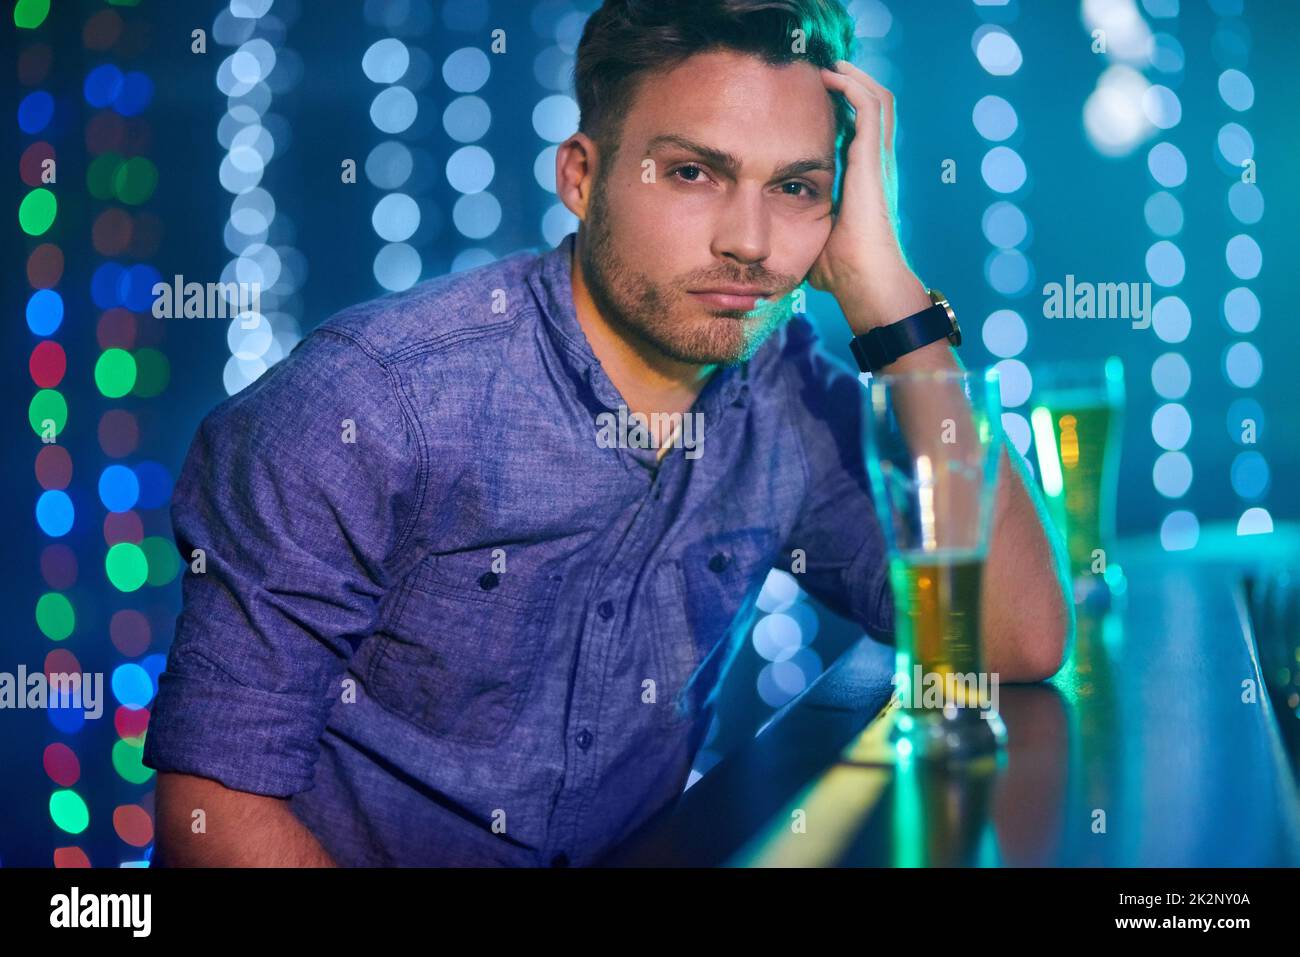 Here to drink all my sorrows away. Portrait of a young man looking upset while sitting at the bar in a club. Stock Photo